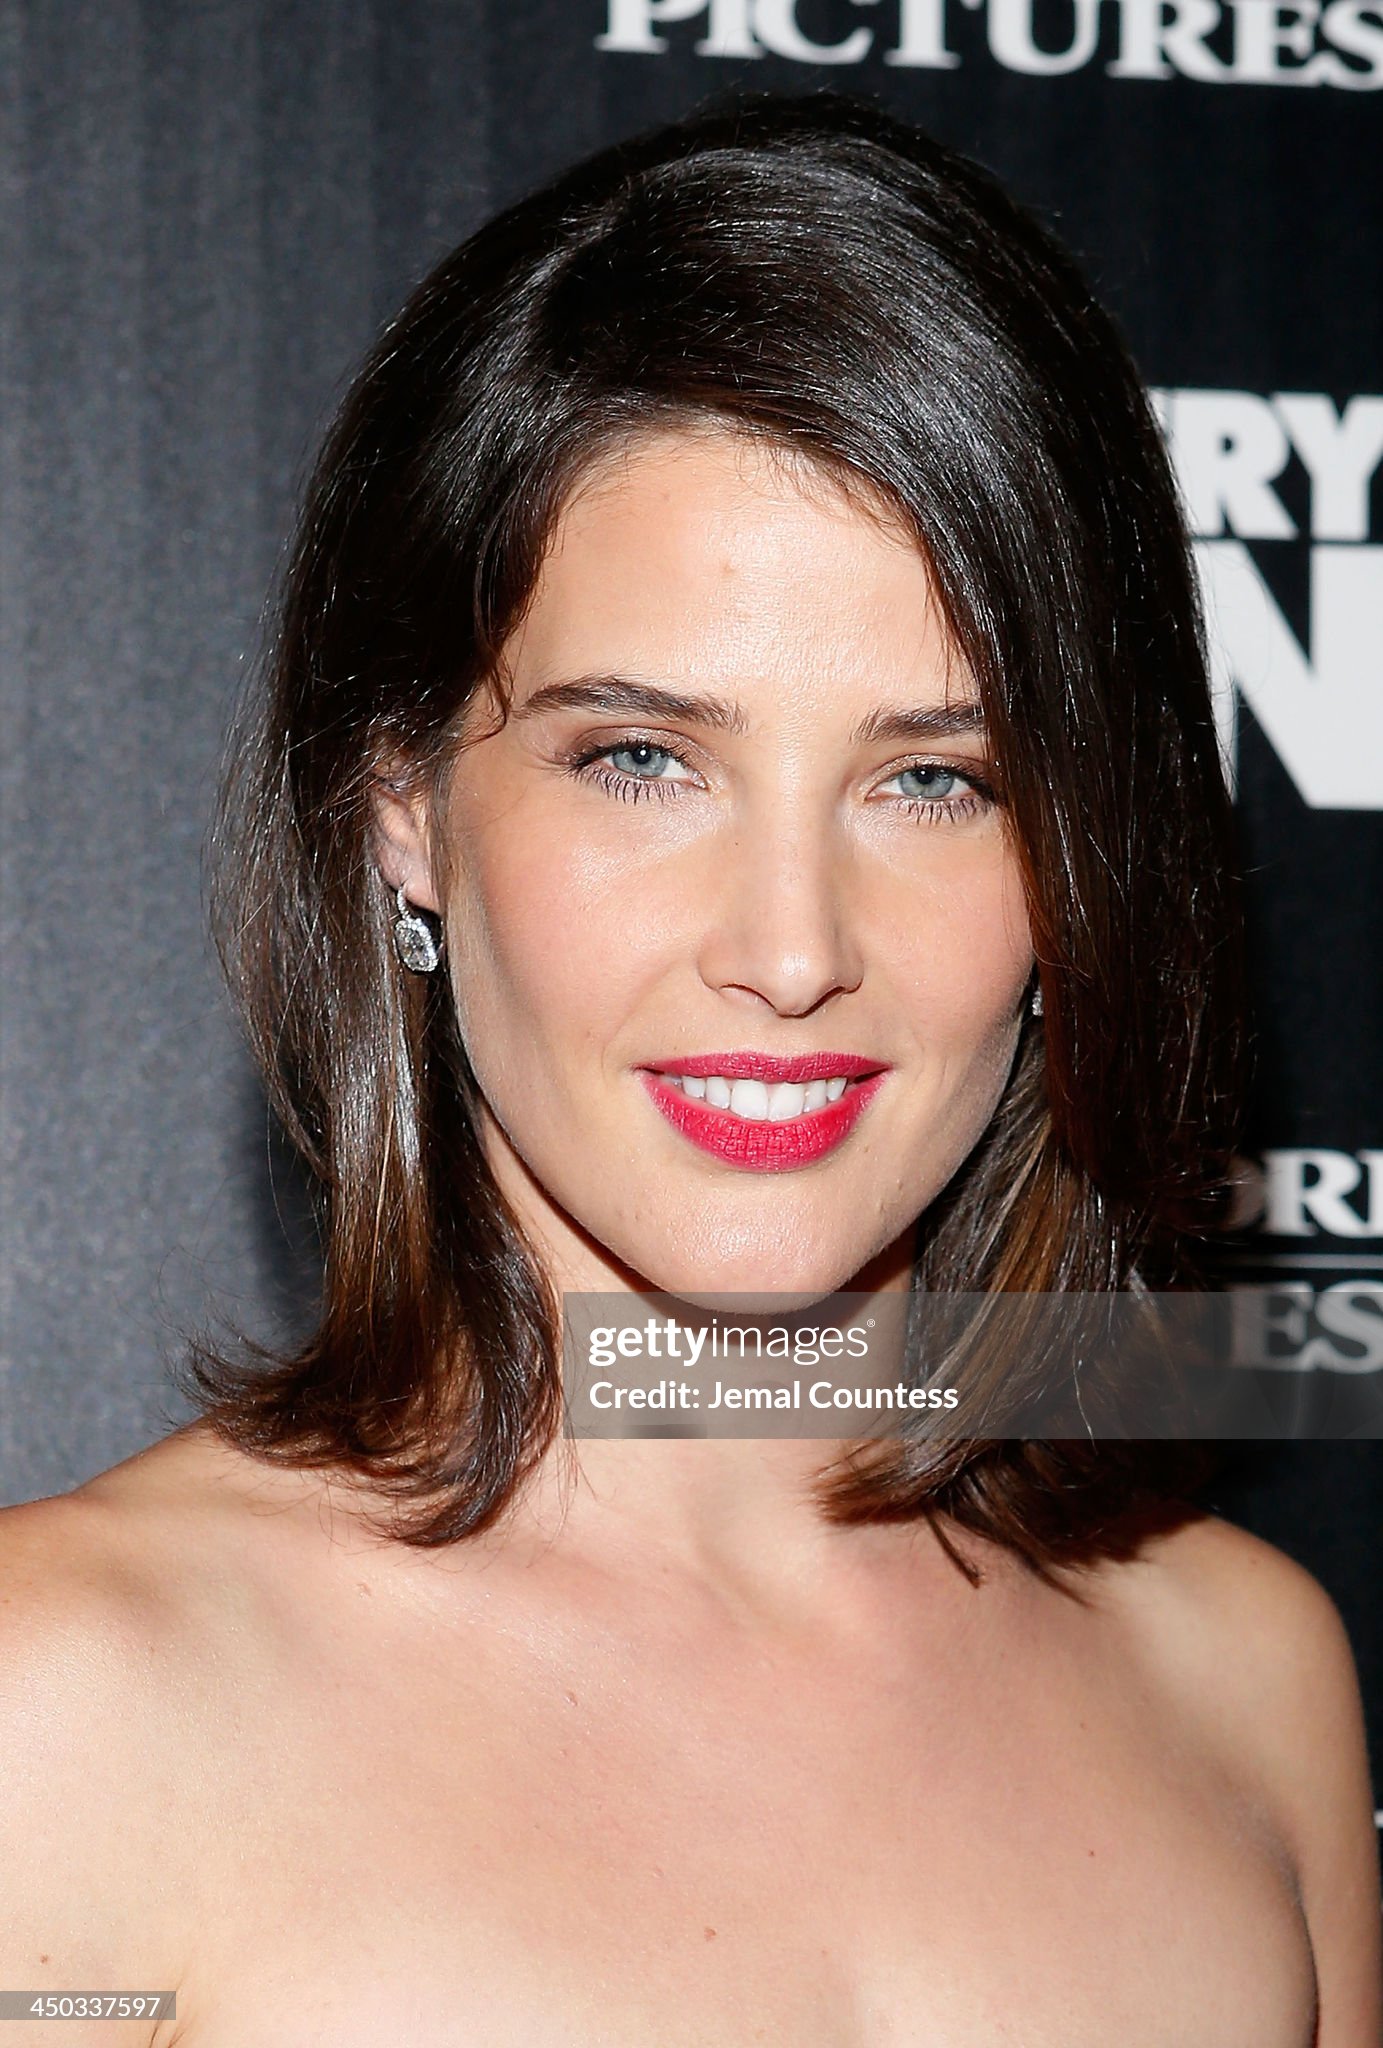 DEBATE sobre belleza, guapura y hermosura (fotos) - VOL II - Página 26 Actress-cobie-smulders-attends-the-screening-of-delivery-man-hosted-by-dreamworks-pictures-and